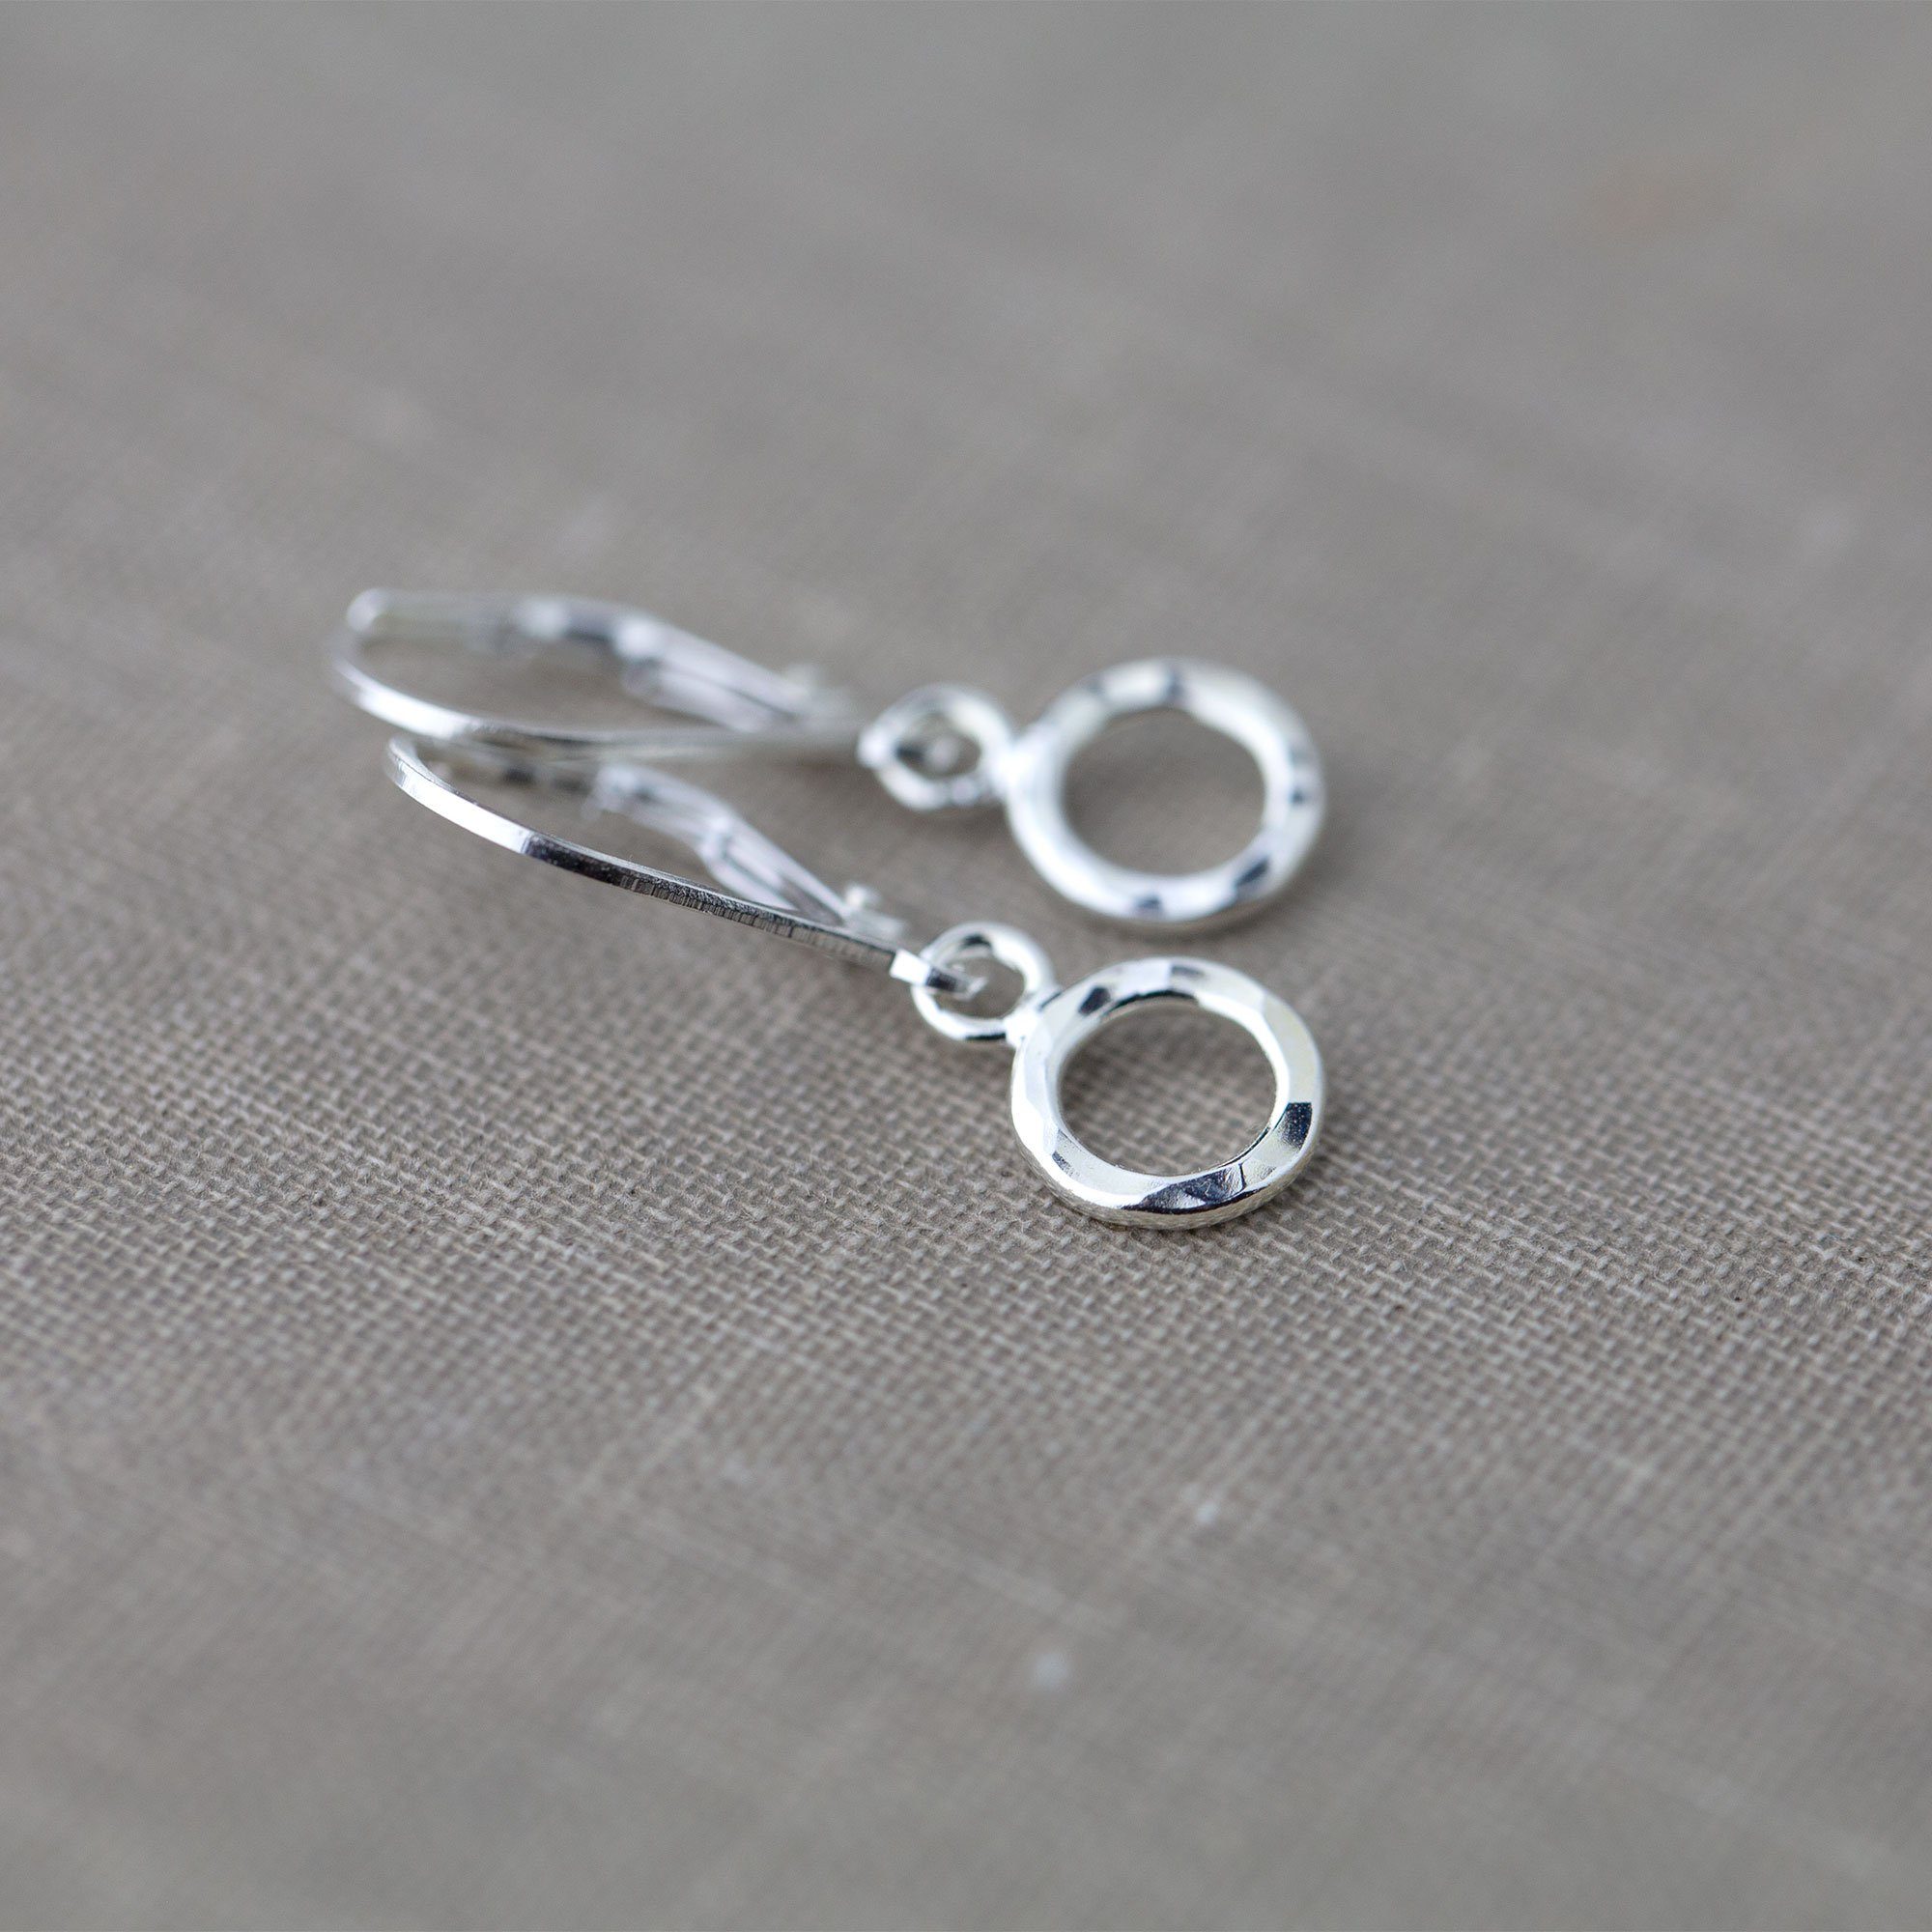 Tiny Hammered Circle Lever-back Earrings - Handmade Jewelry by Burnish